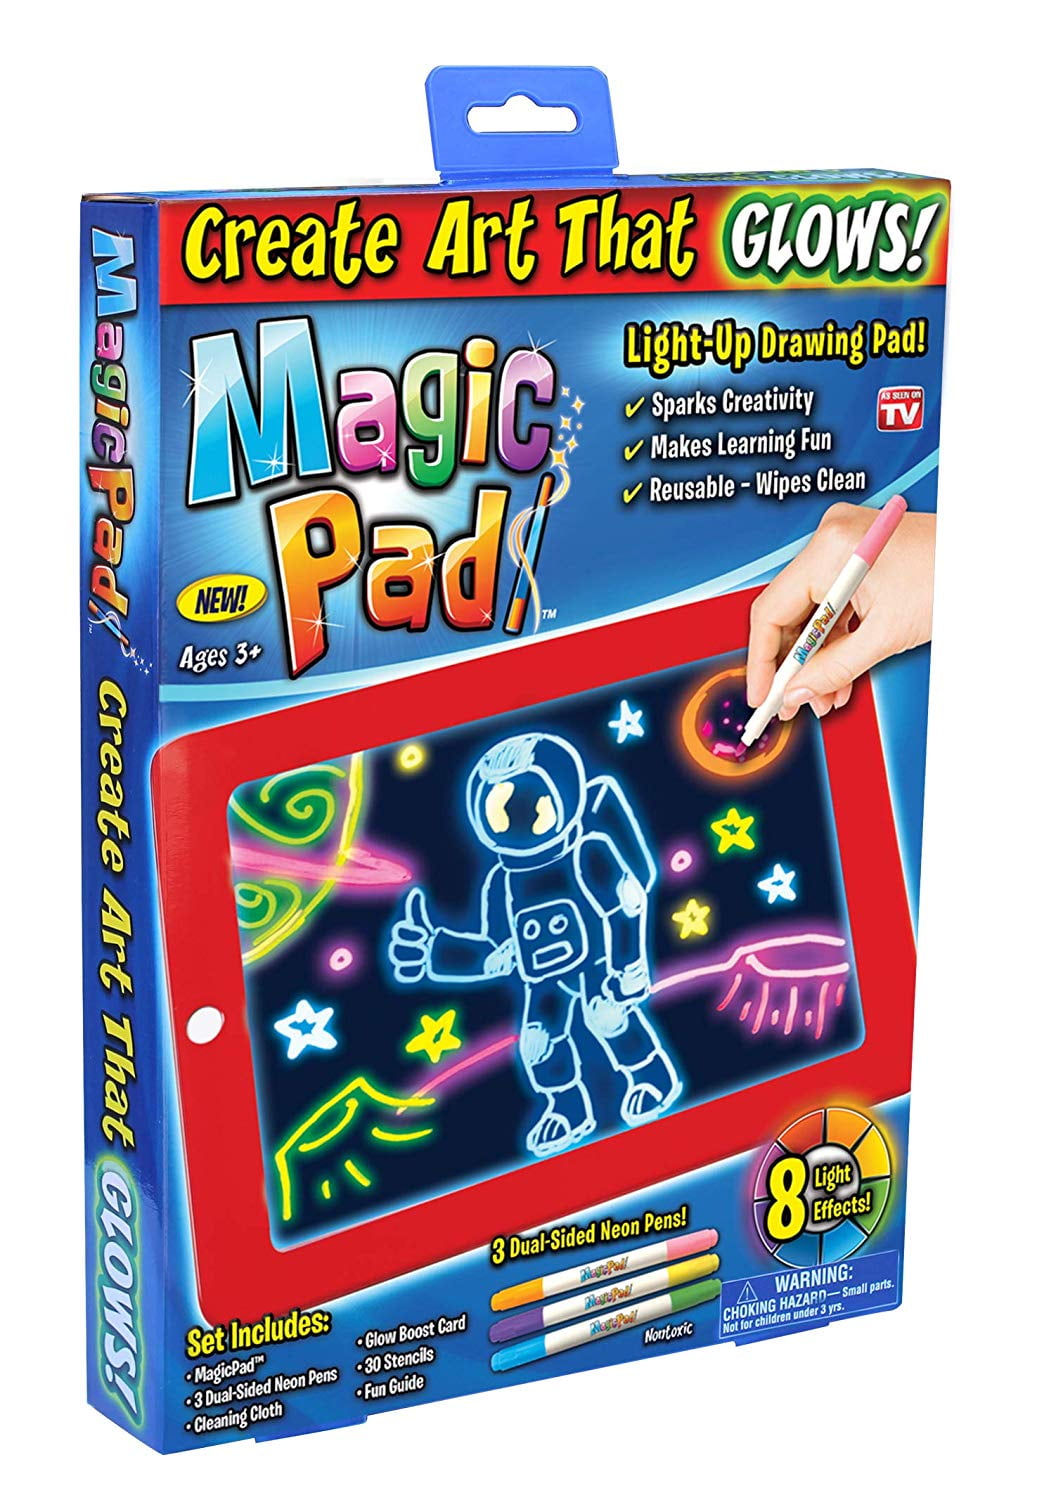 MAGIC MAGNETIC DRAWING BOARD WIPE CLEAN CHILDREN KIDS  DRAWING ART LEARNING 